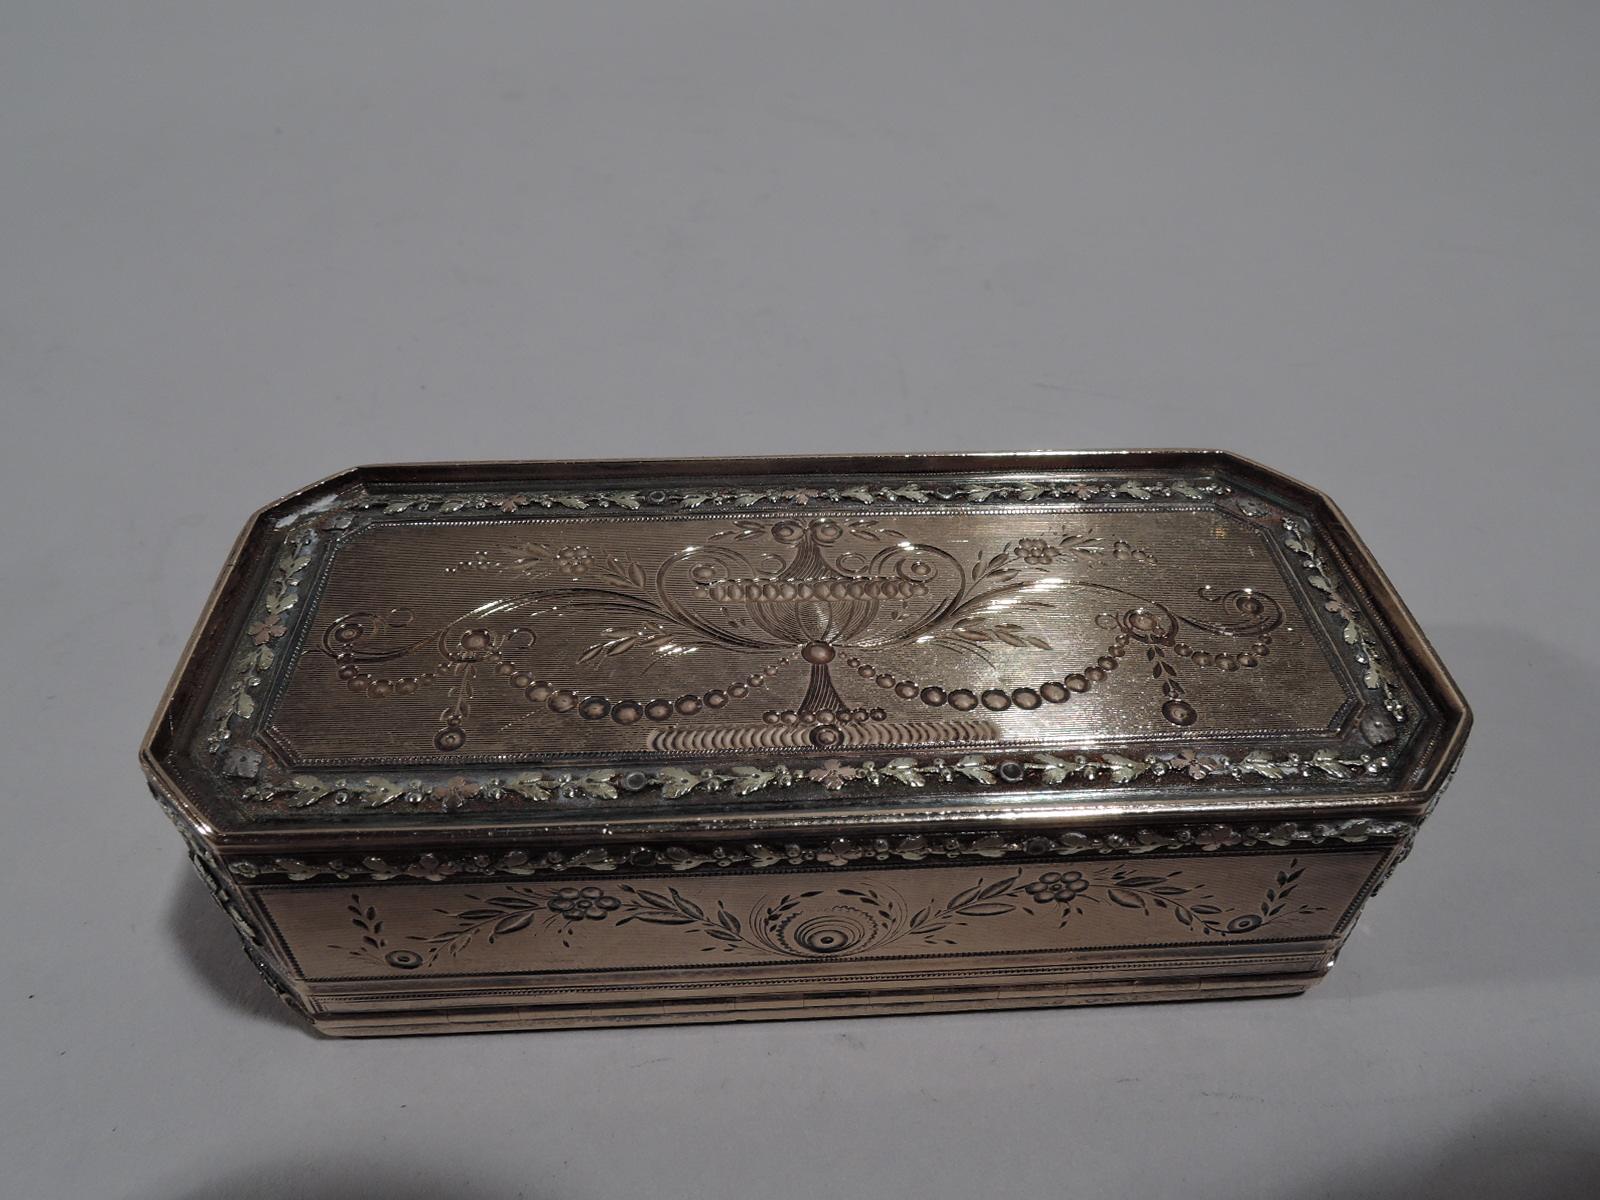 Antique French Neoclassical 18 Karat Gold Snuffbox with Bright-Cut Ornament 2